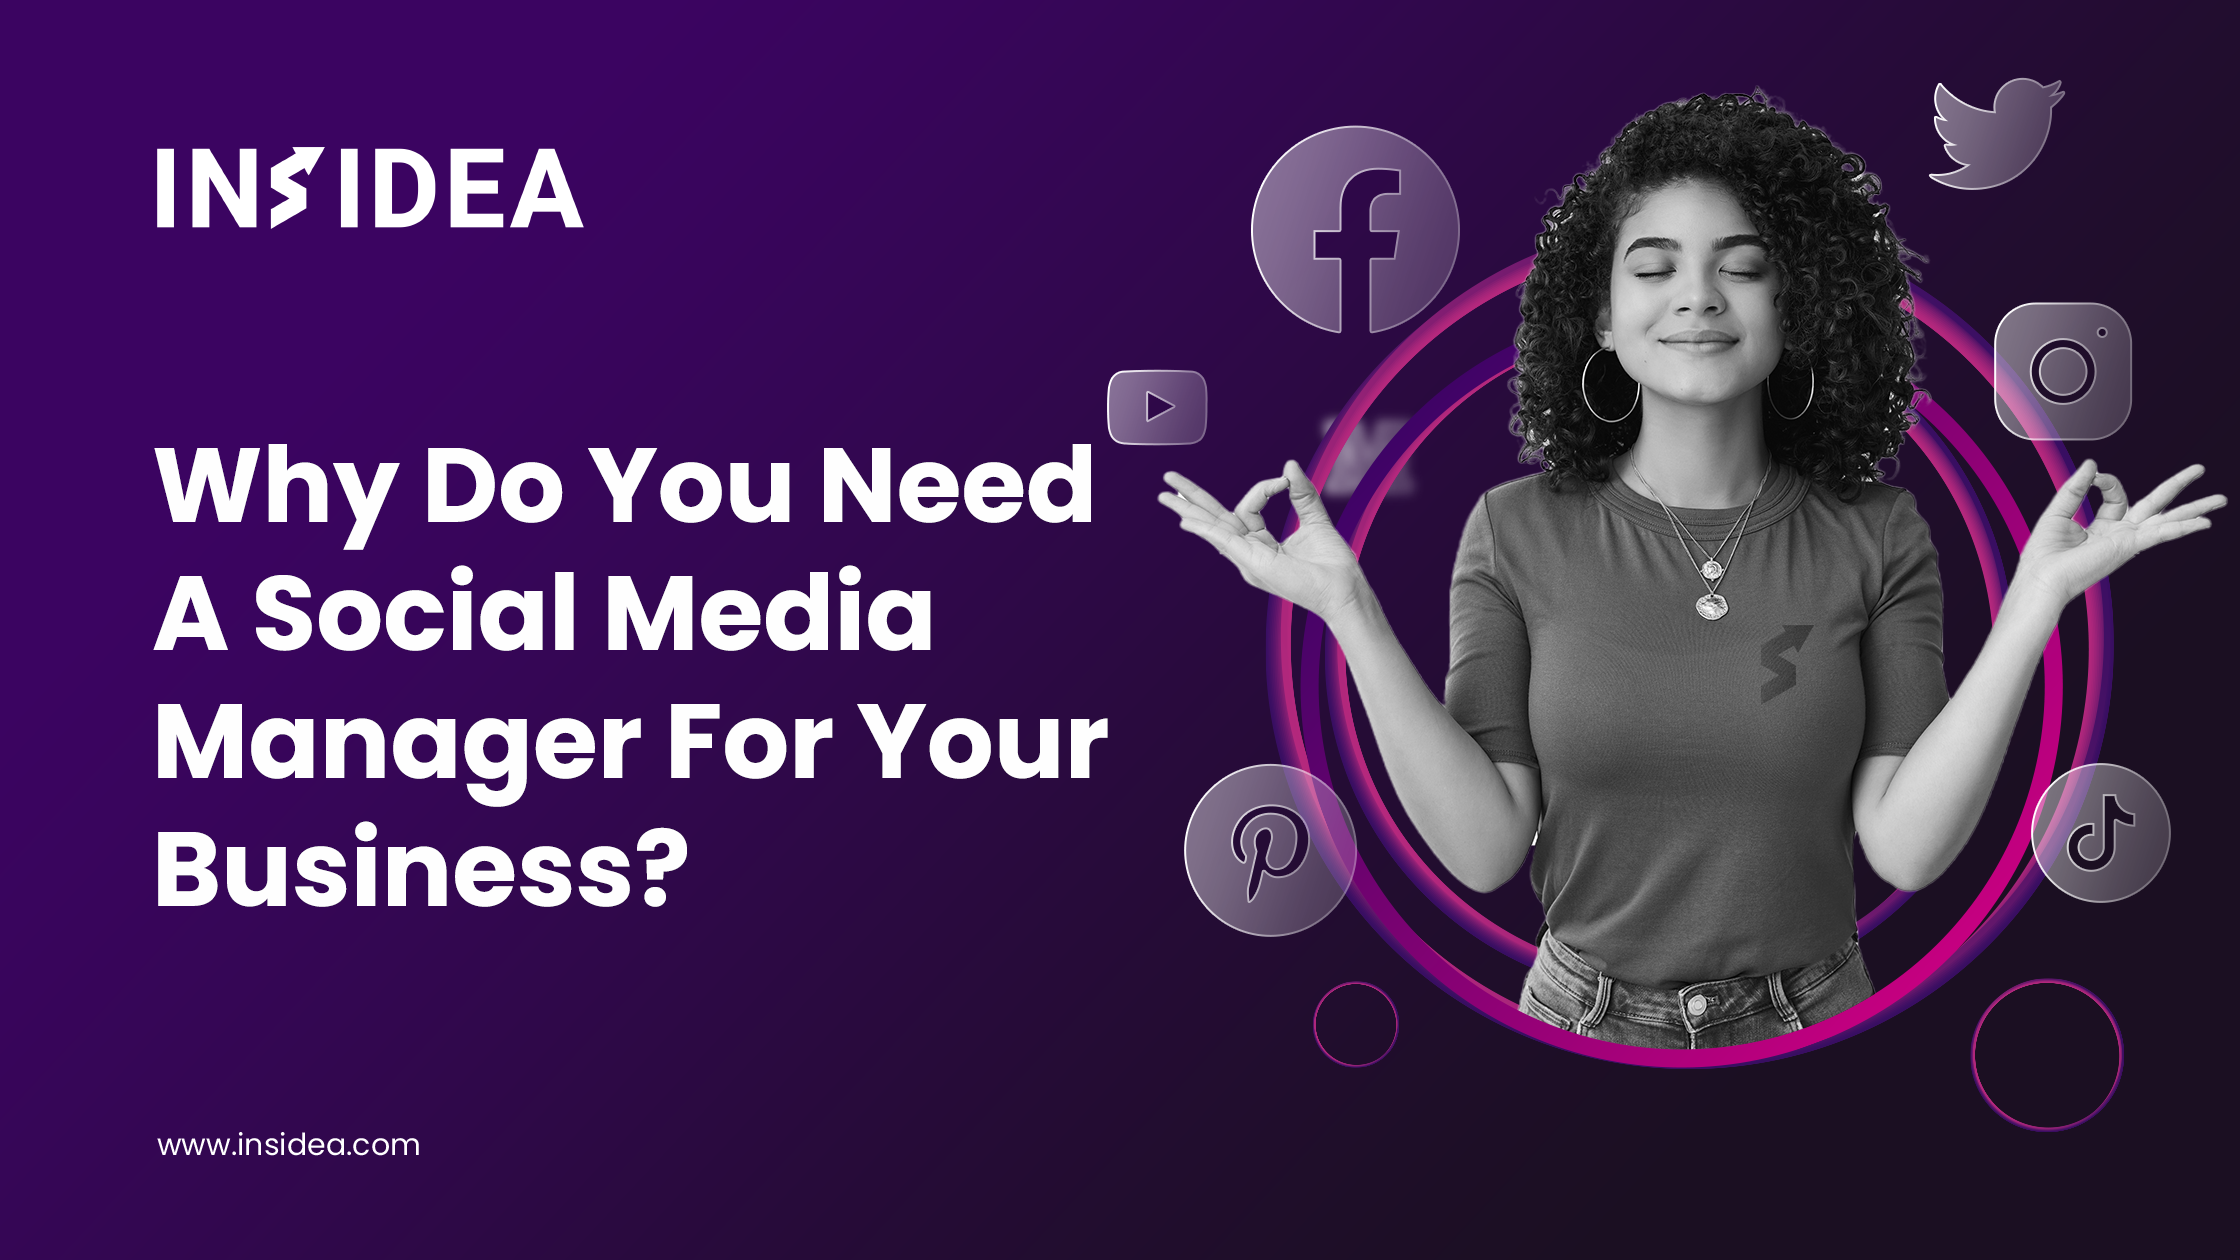 Why Do You Need A Social Media Manager For Your Business?